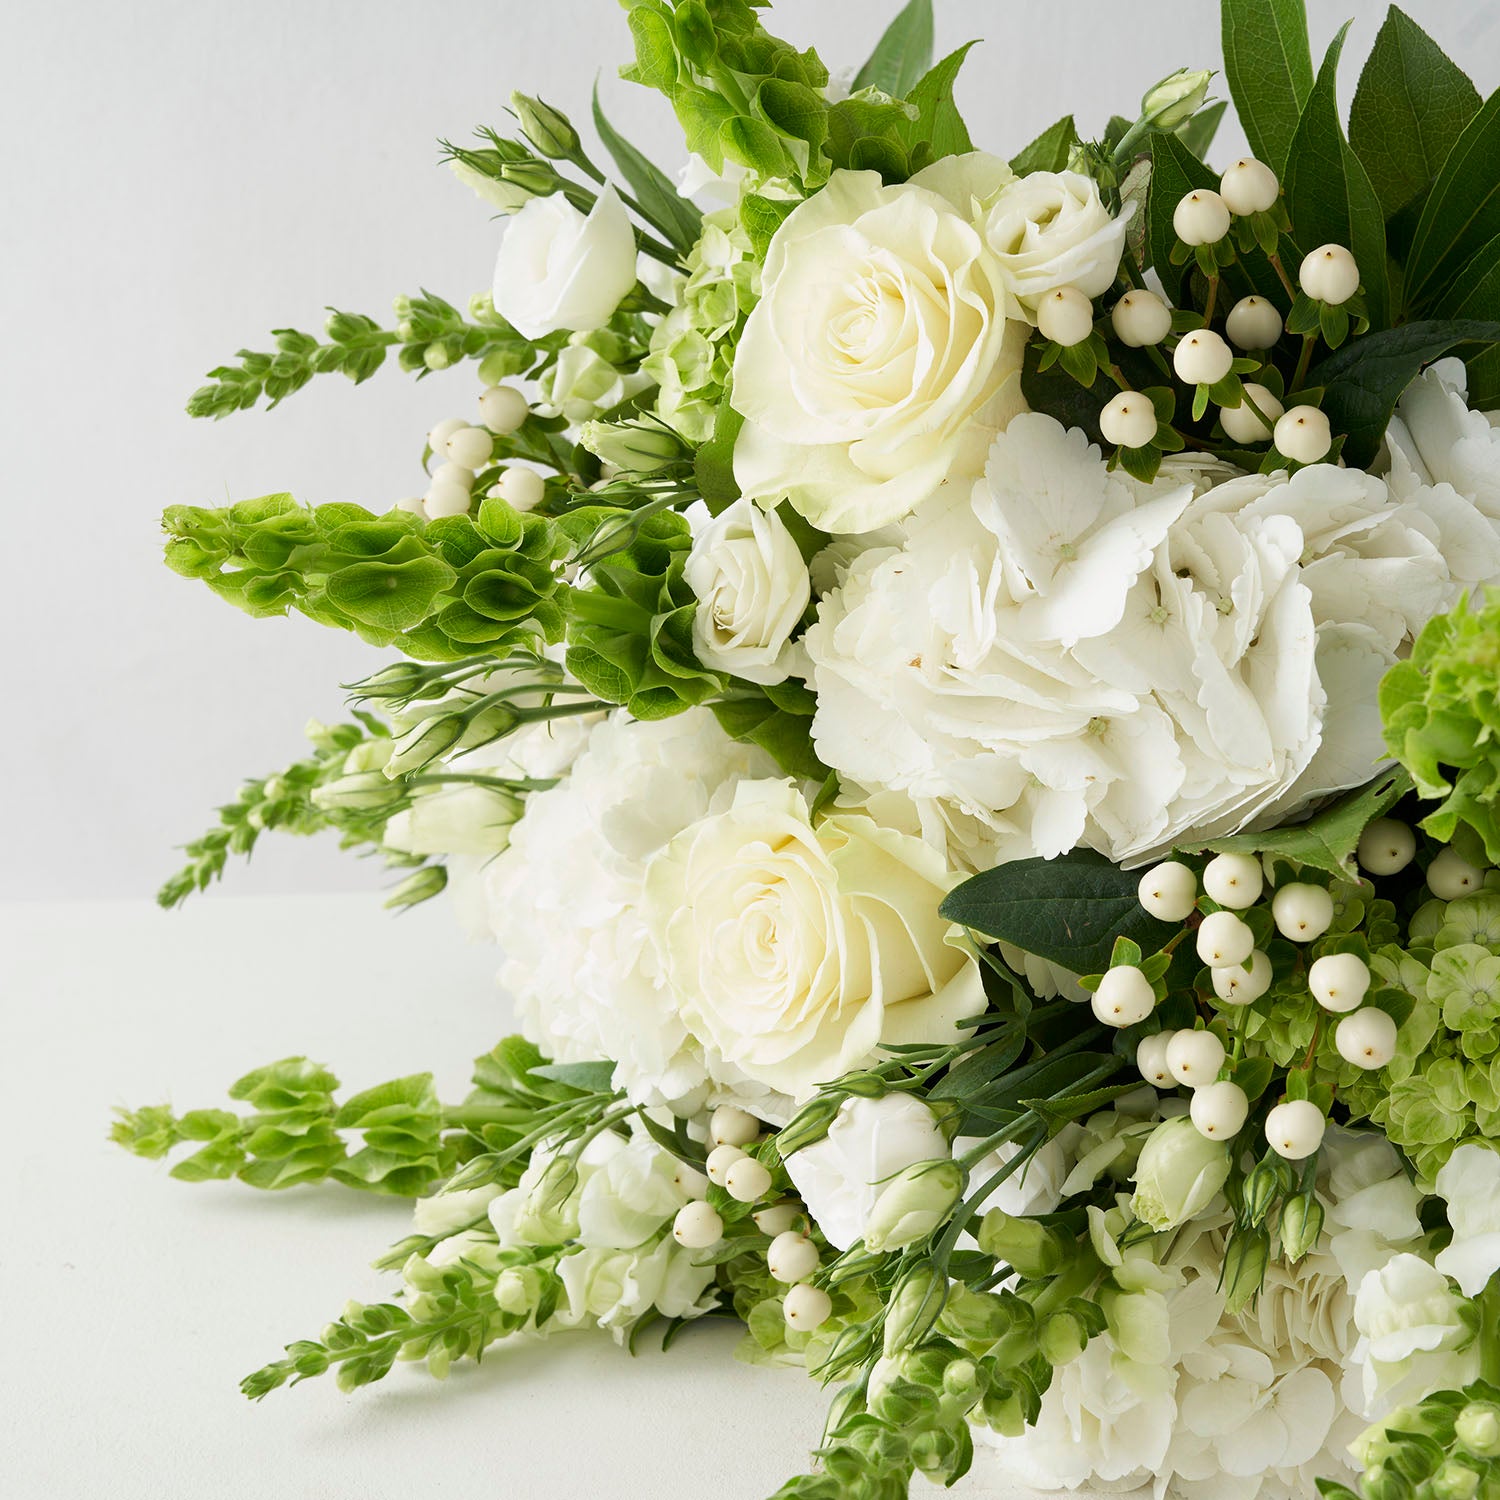  Close up of white and green flowers, including roses, hypericum berries, hydrangeas, snapdragons, and bells of ireland.